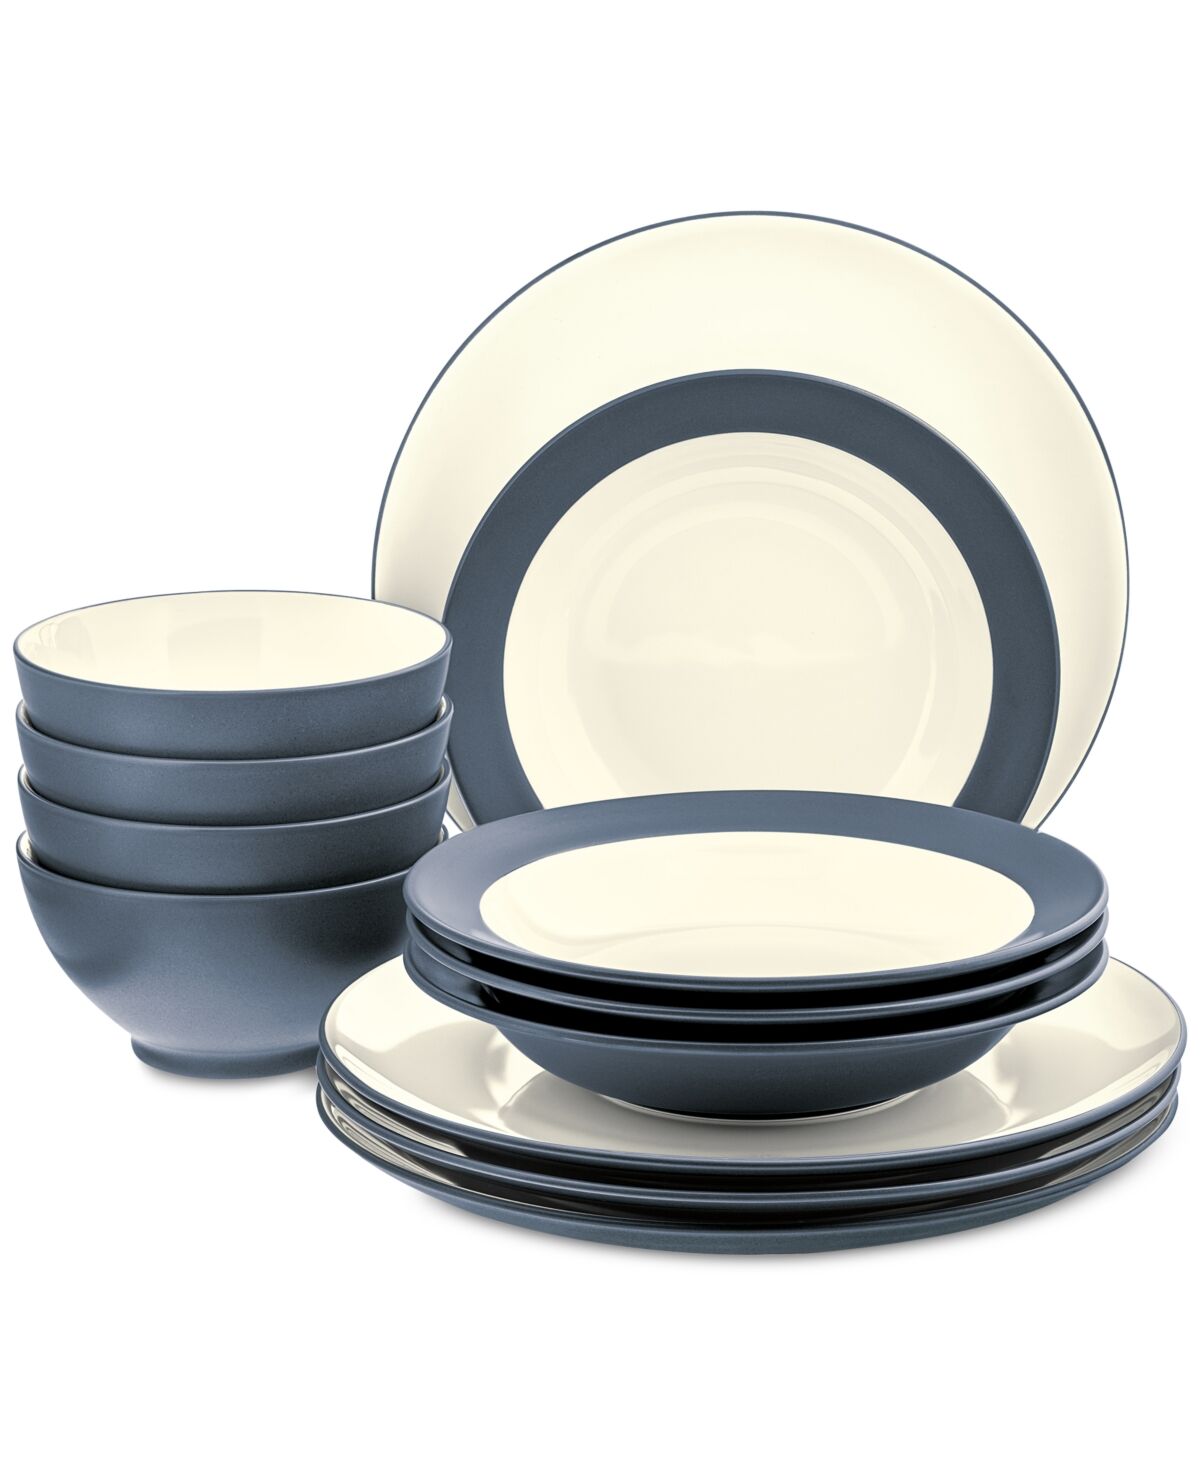 Noritake Colorwave Coupe 12-Piece Dinnerware Set, Service for 4, Created for Macy's - Blue